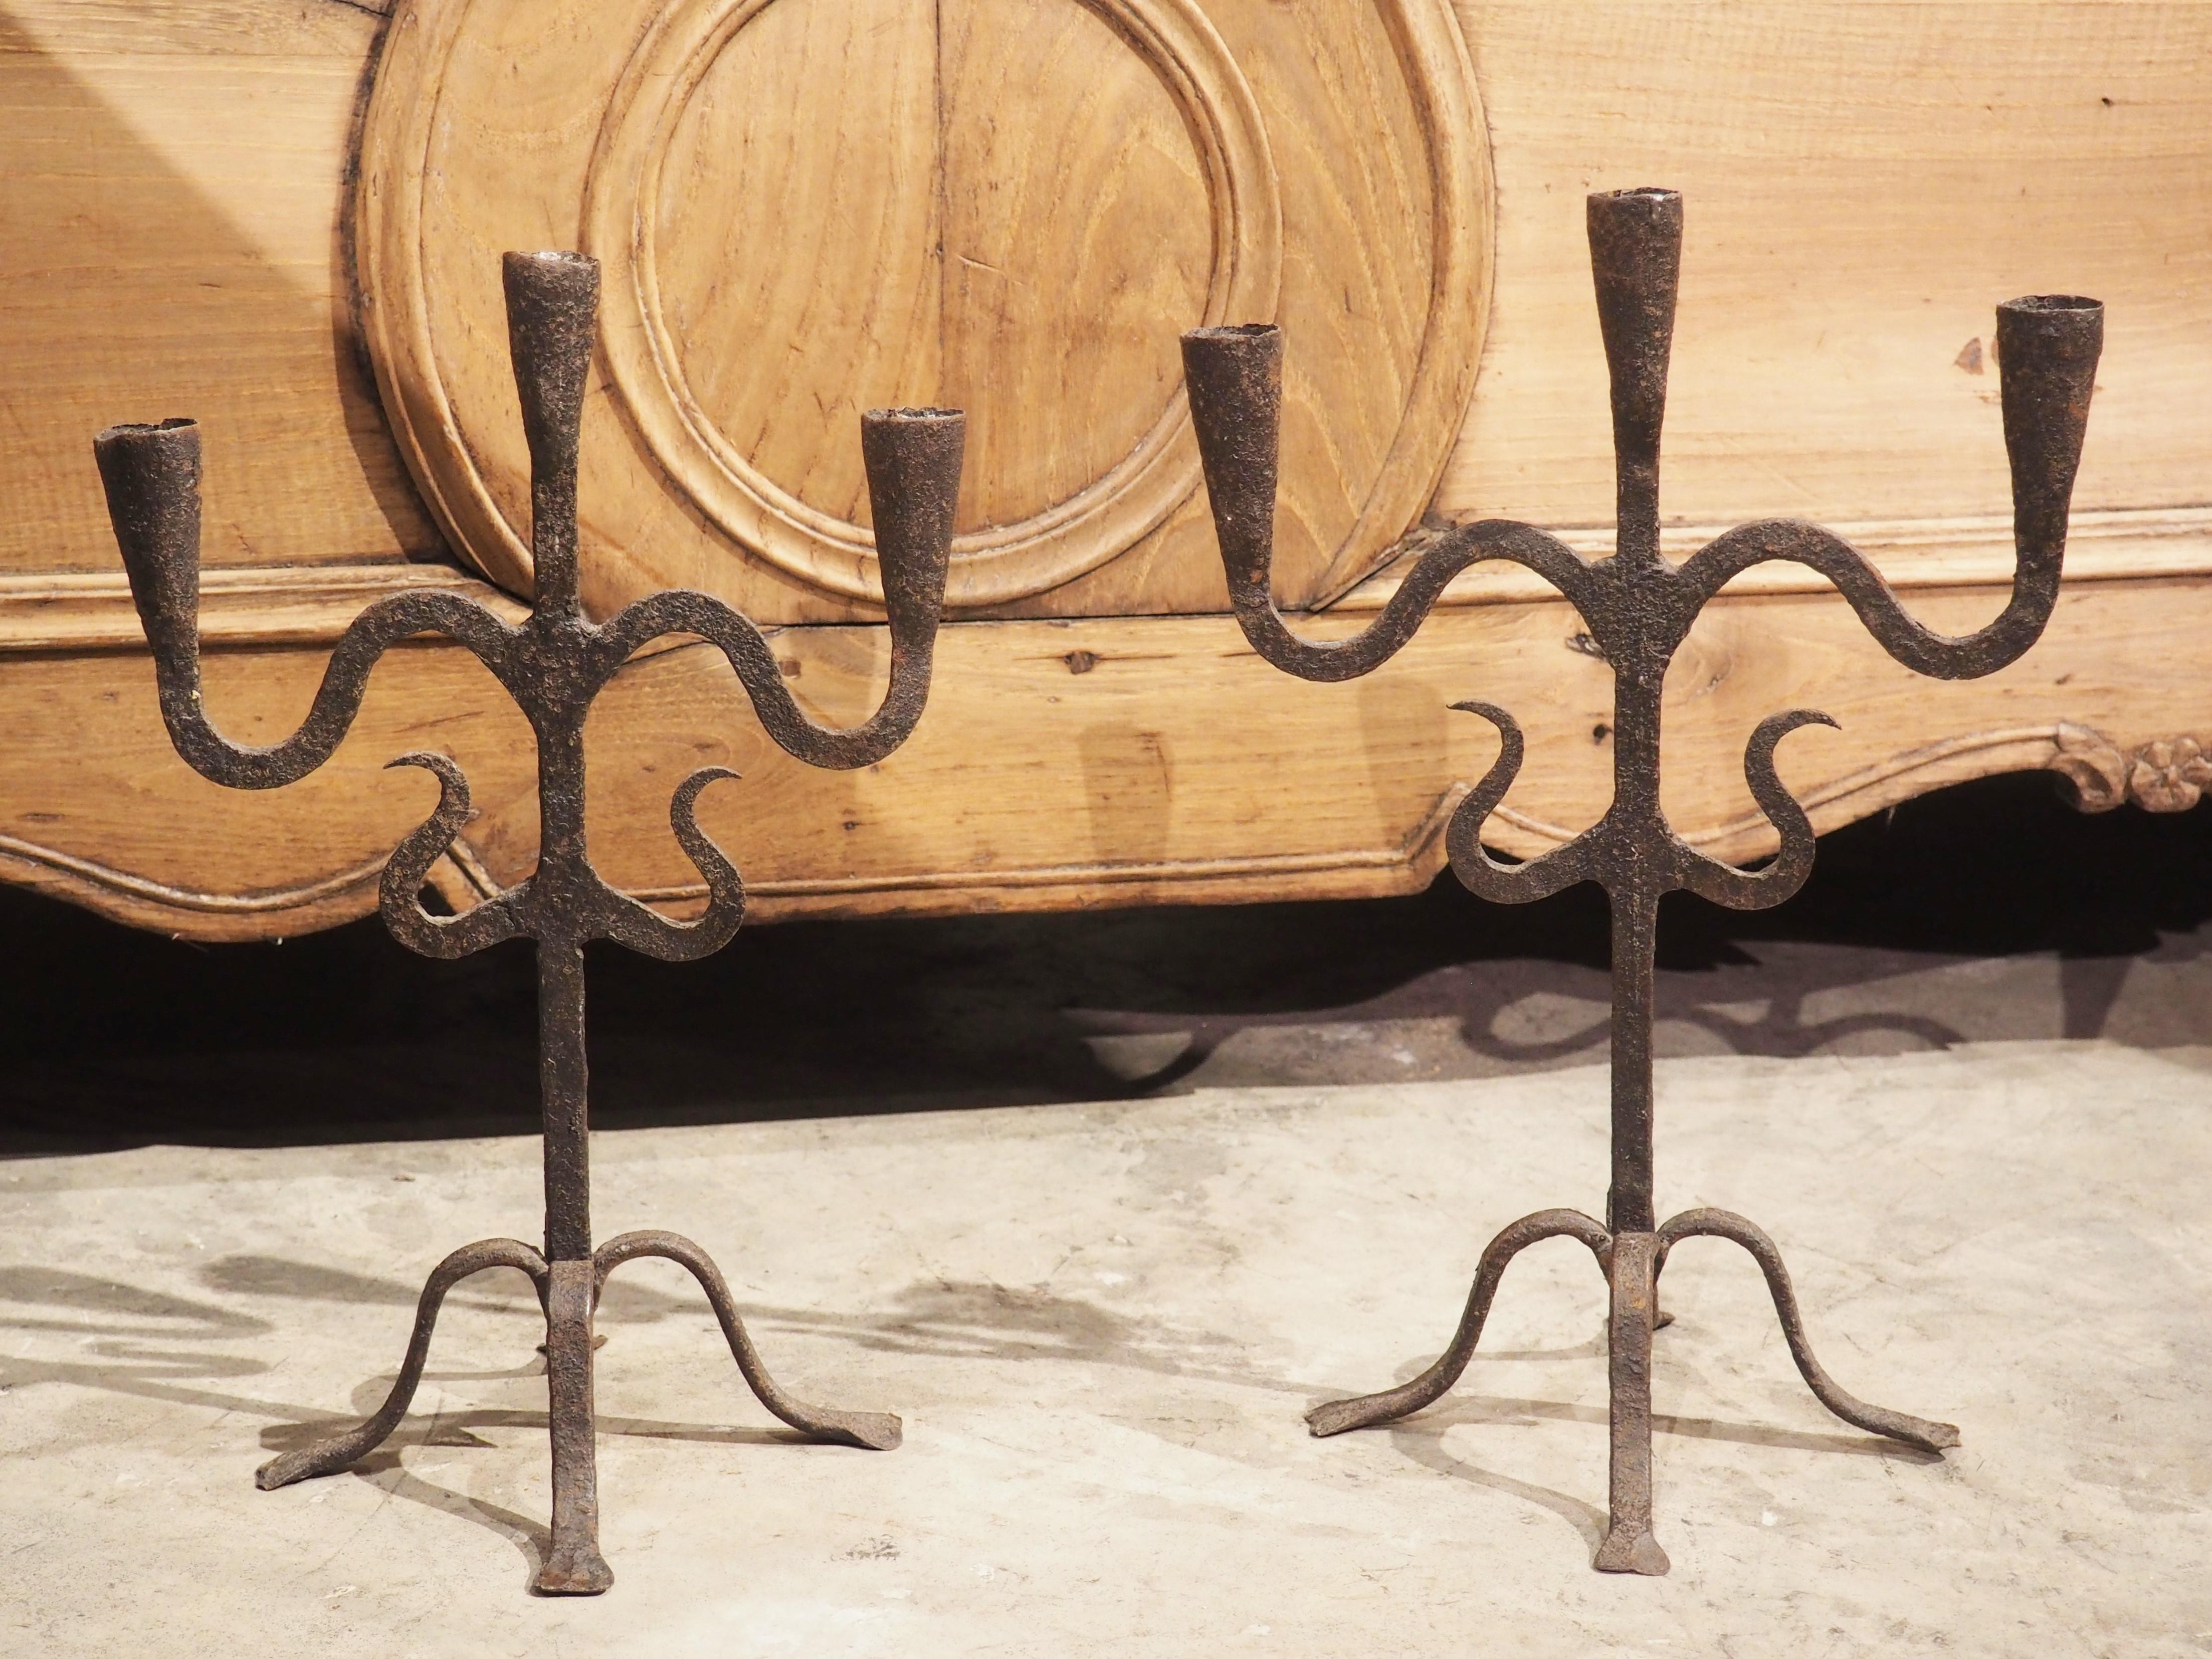 Hand forged in Spain, circa 1800, this pair of iron candle holders can be used in any room of the house. Both candle holders have three cylindrical cups, with the center one sitting above the outer two that rest on S-scroll arms. A pair of smaller